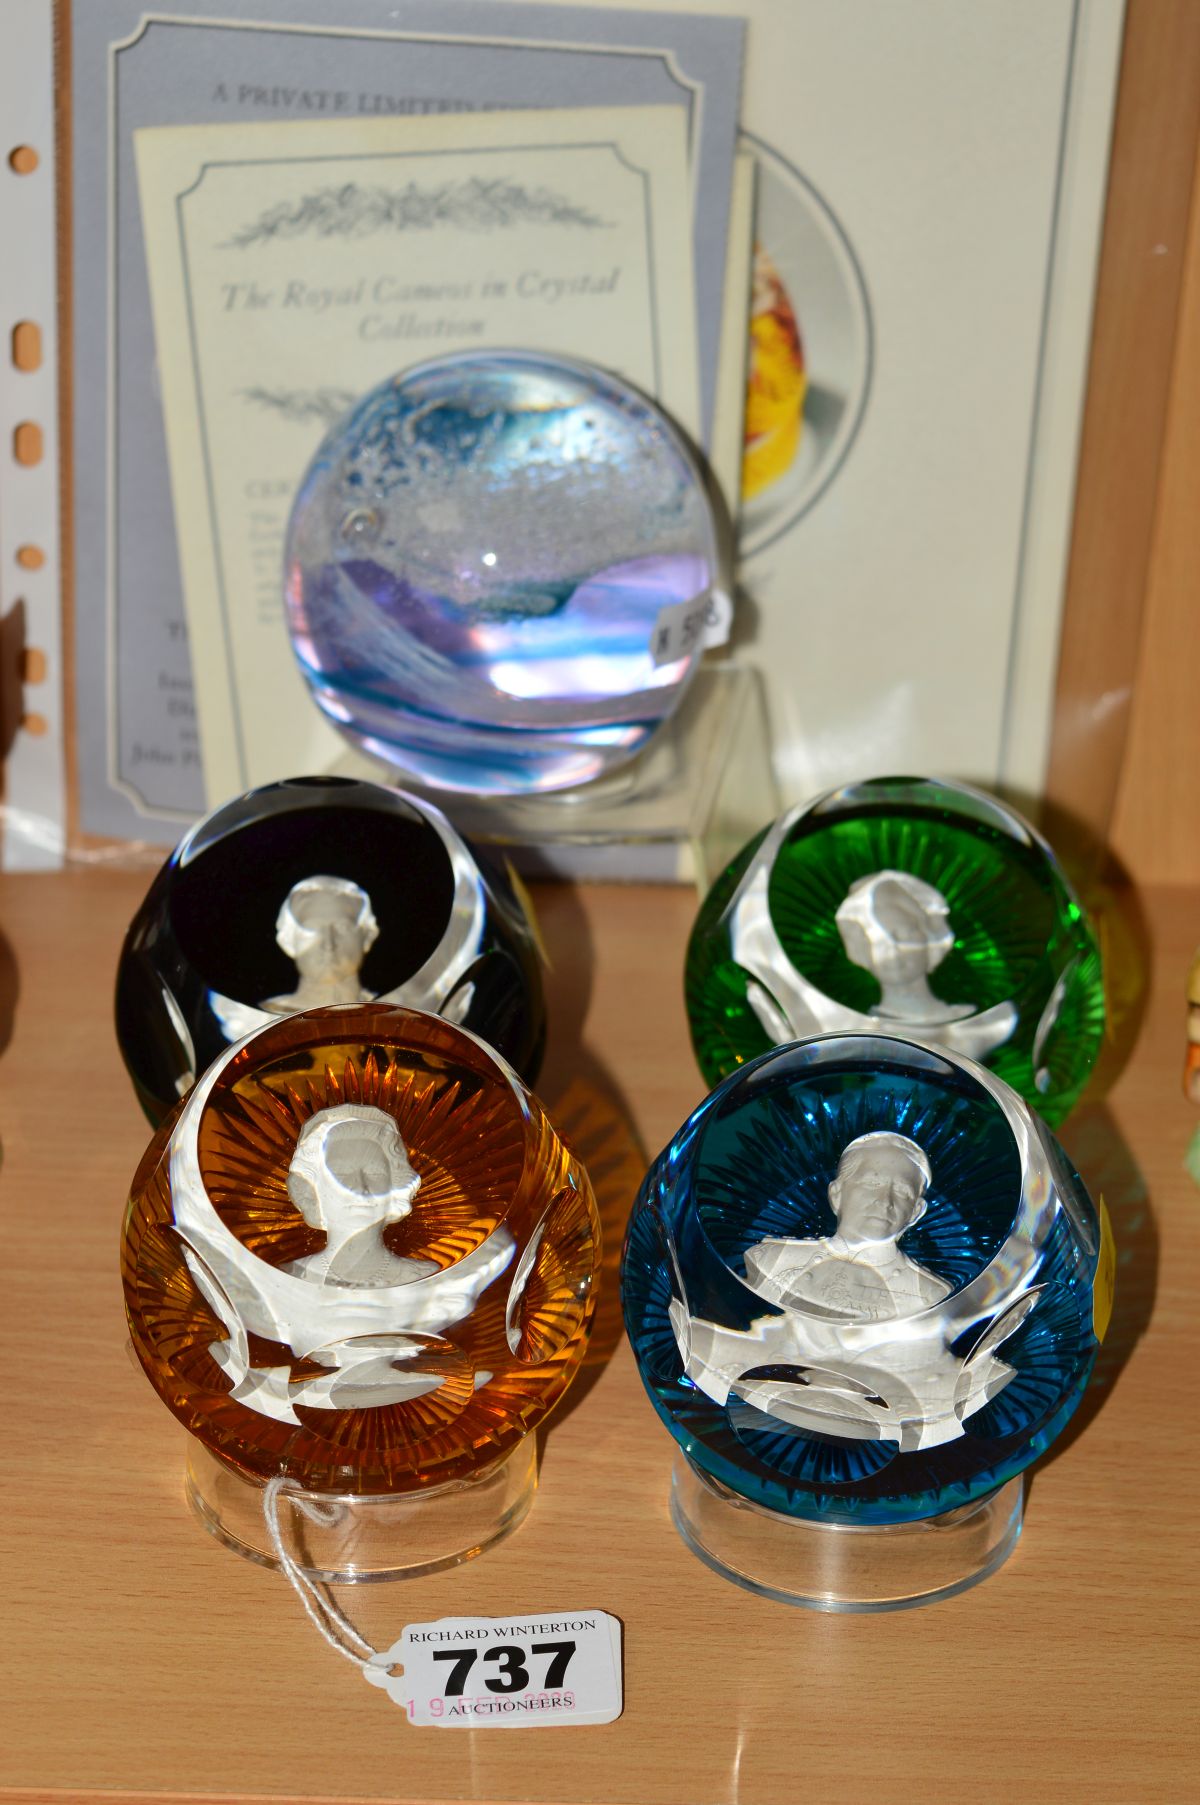 A SET OF FOUR BACCARAT PAPERWEIGHTS BY JOHN PINCHES, LONDON, from 'The Royal Cameos in Crystal